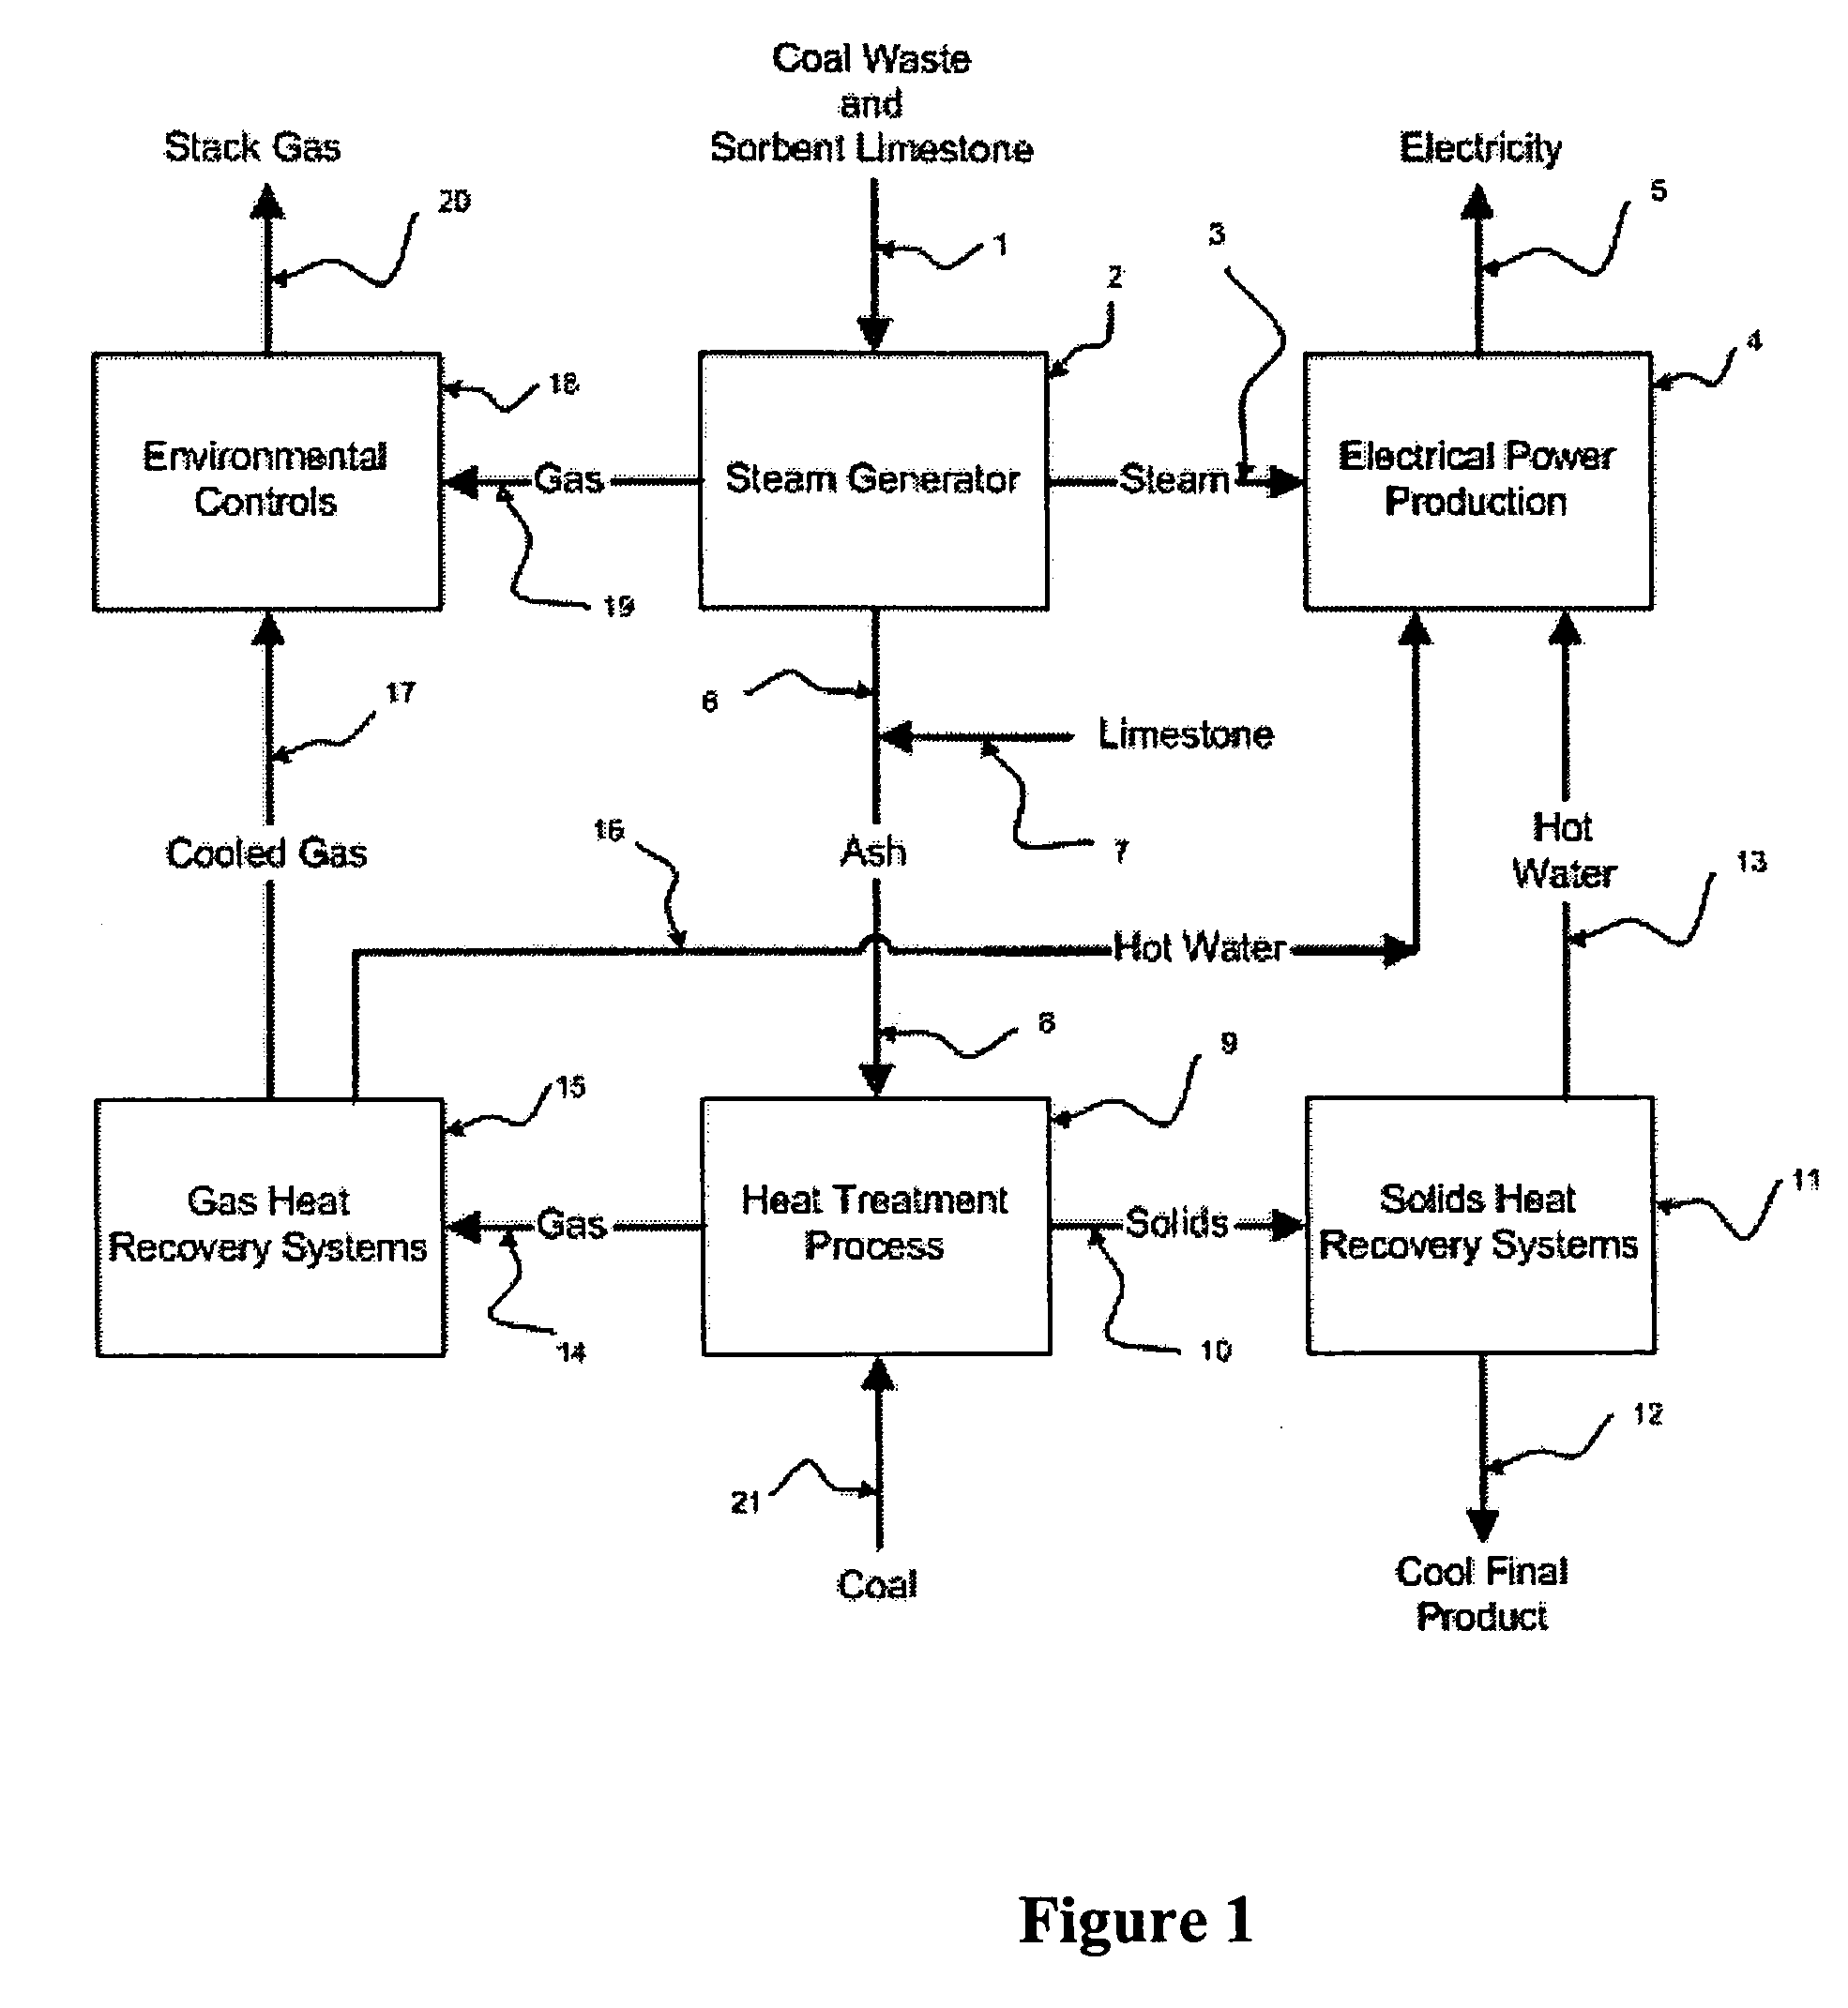 Method of making pozzolands and cementitious materials from coal combustion by-products